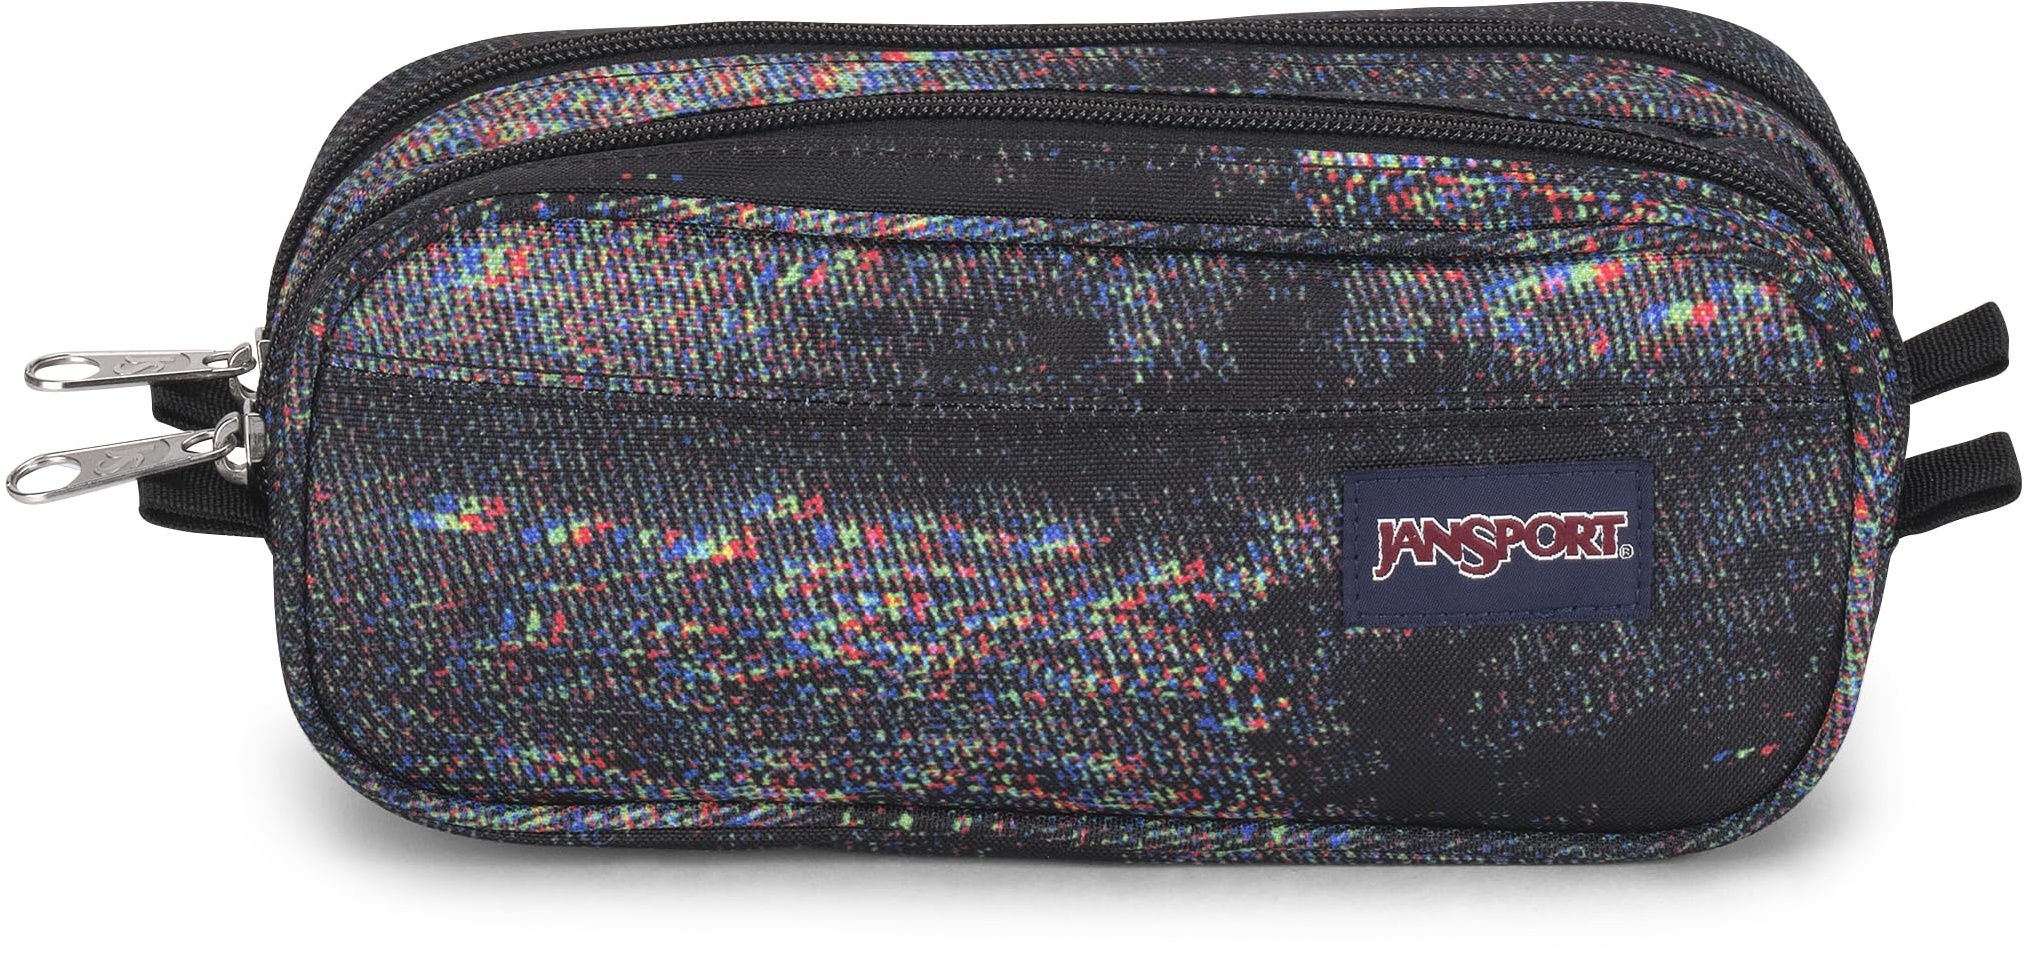 JanSport Large Accessory Pouch, Große Tasche, 1.3 L, 11 x 23 x 7.5 cm, Screen Static